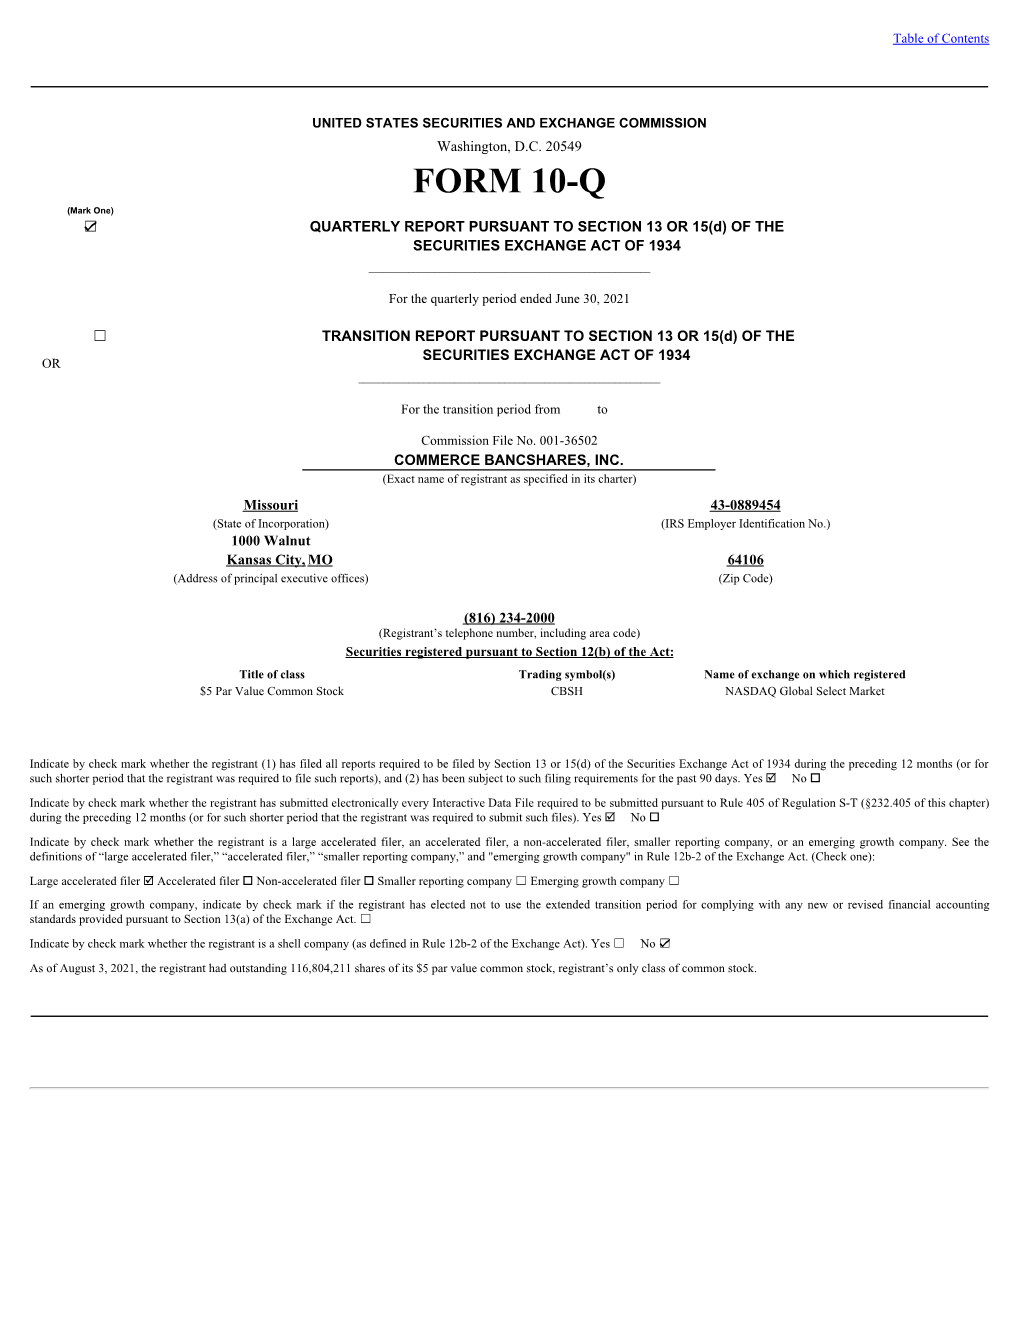 FORM 10-Q (Mark One) ☑ QUARTERLY REPORT PURSUANT to SECTION 13 OR 15(D) of the SECURITIES EXCHANGE ACT of 1934 ______